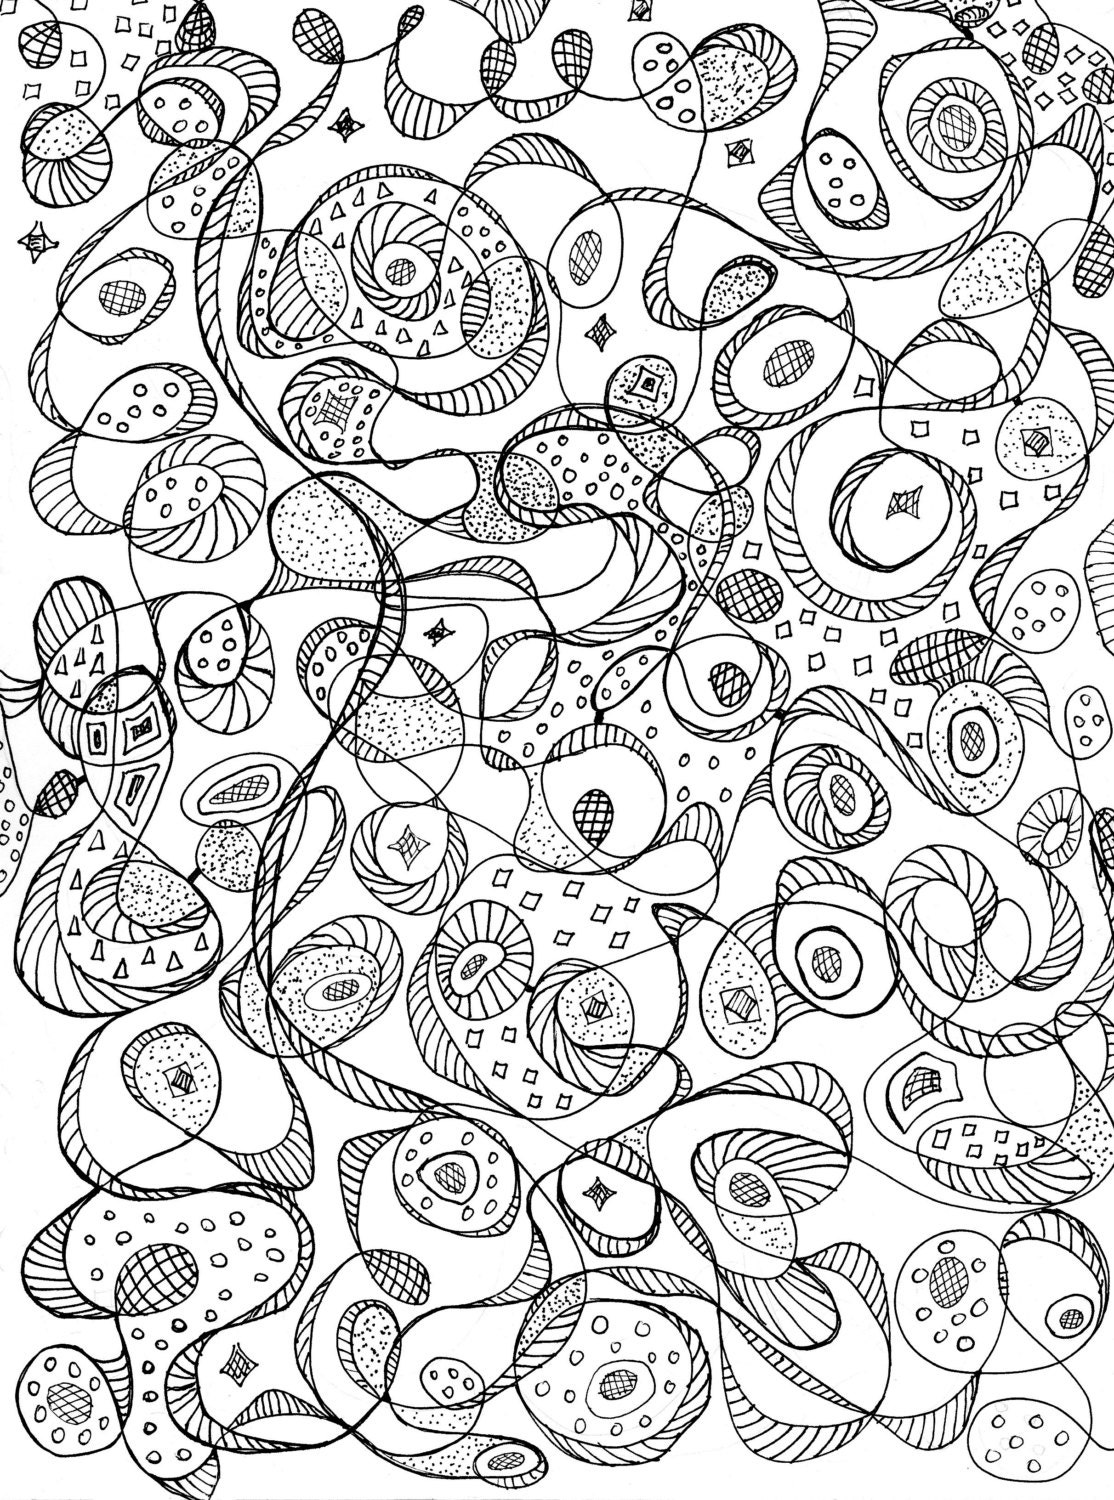 Abstract coloring sheet/page download